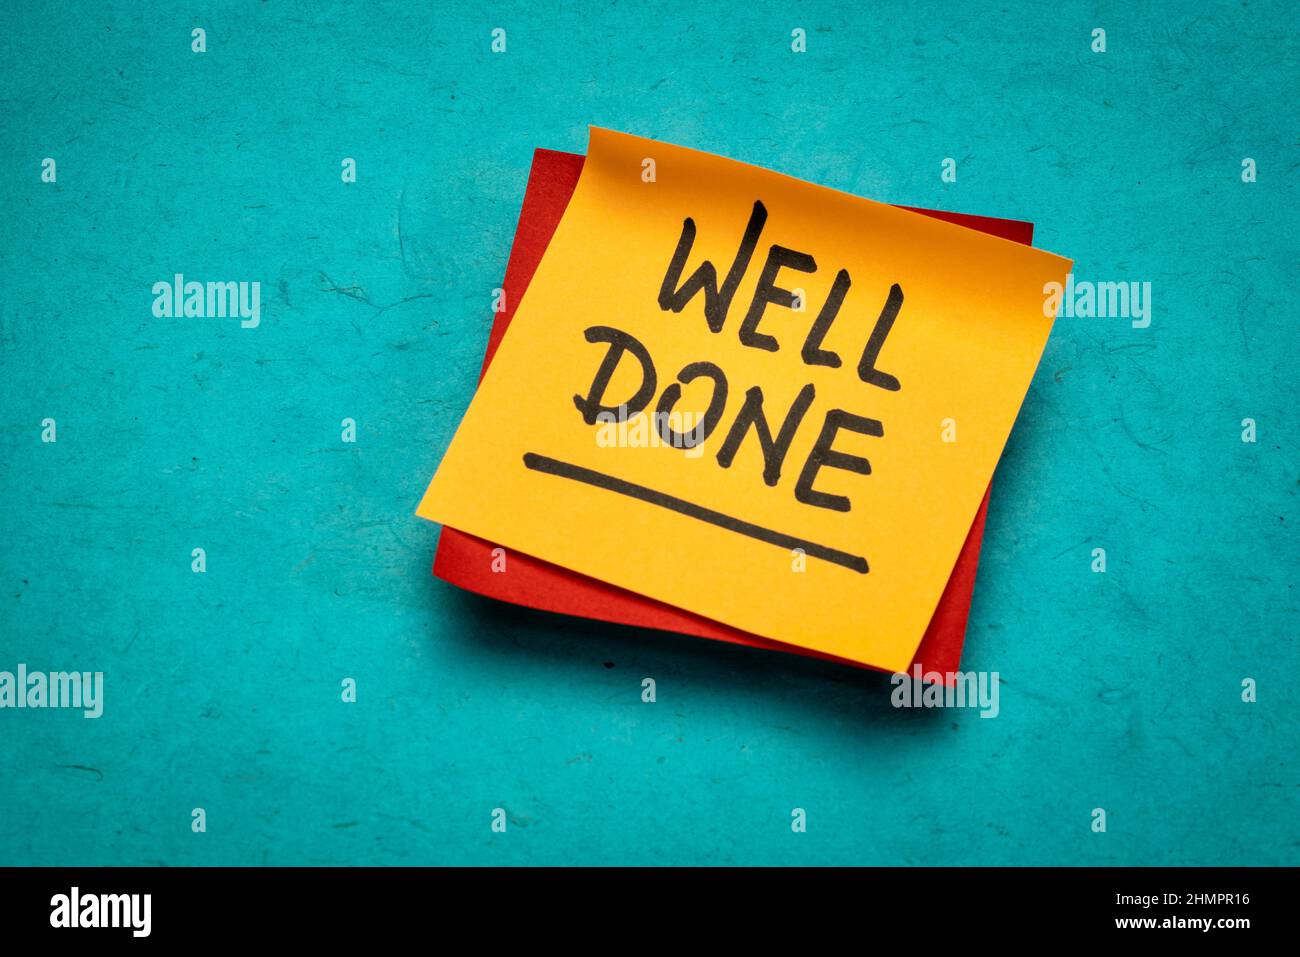 well done handwriting on reminder note, positive affirmation or congratulations concept Stock Photo